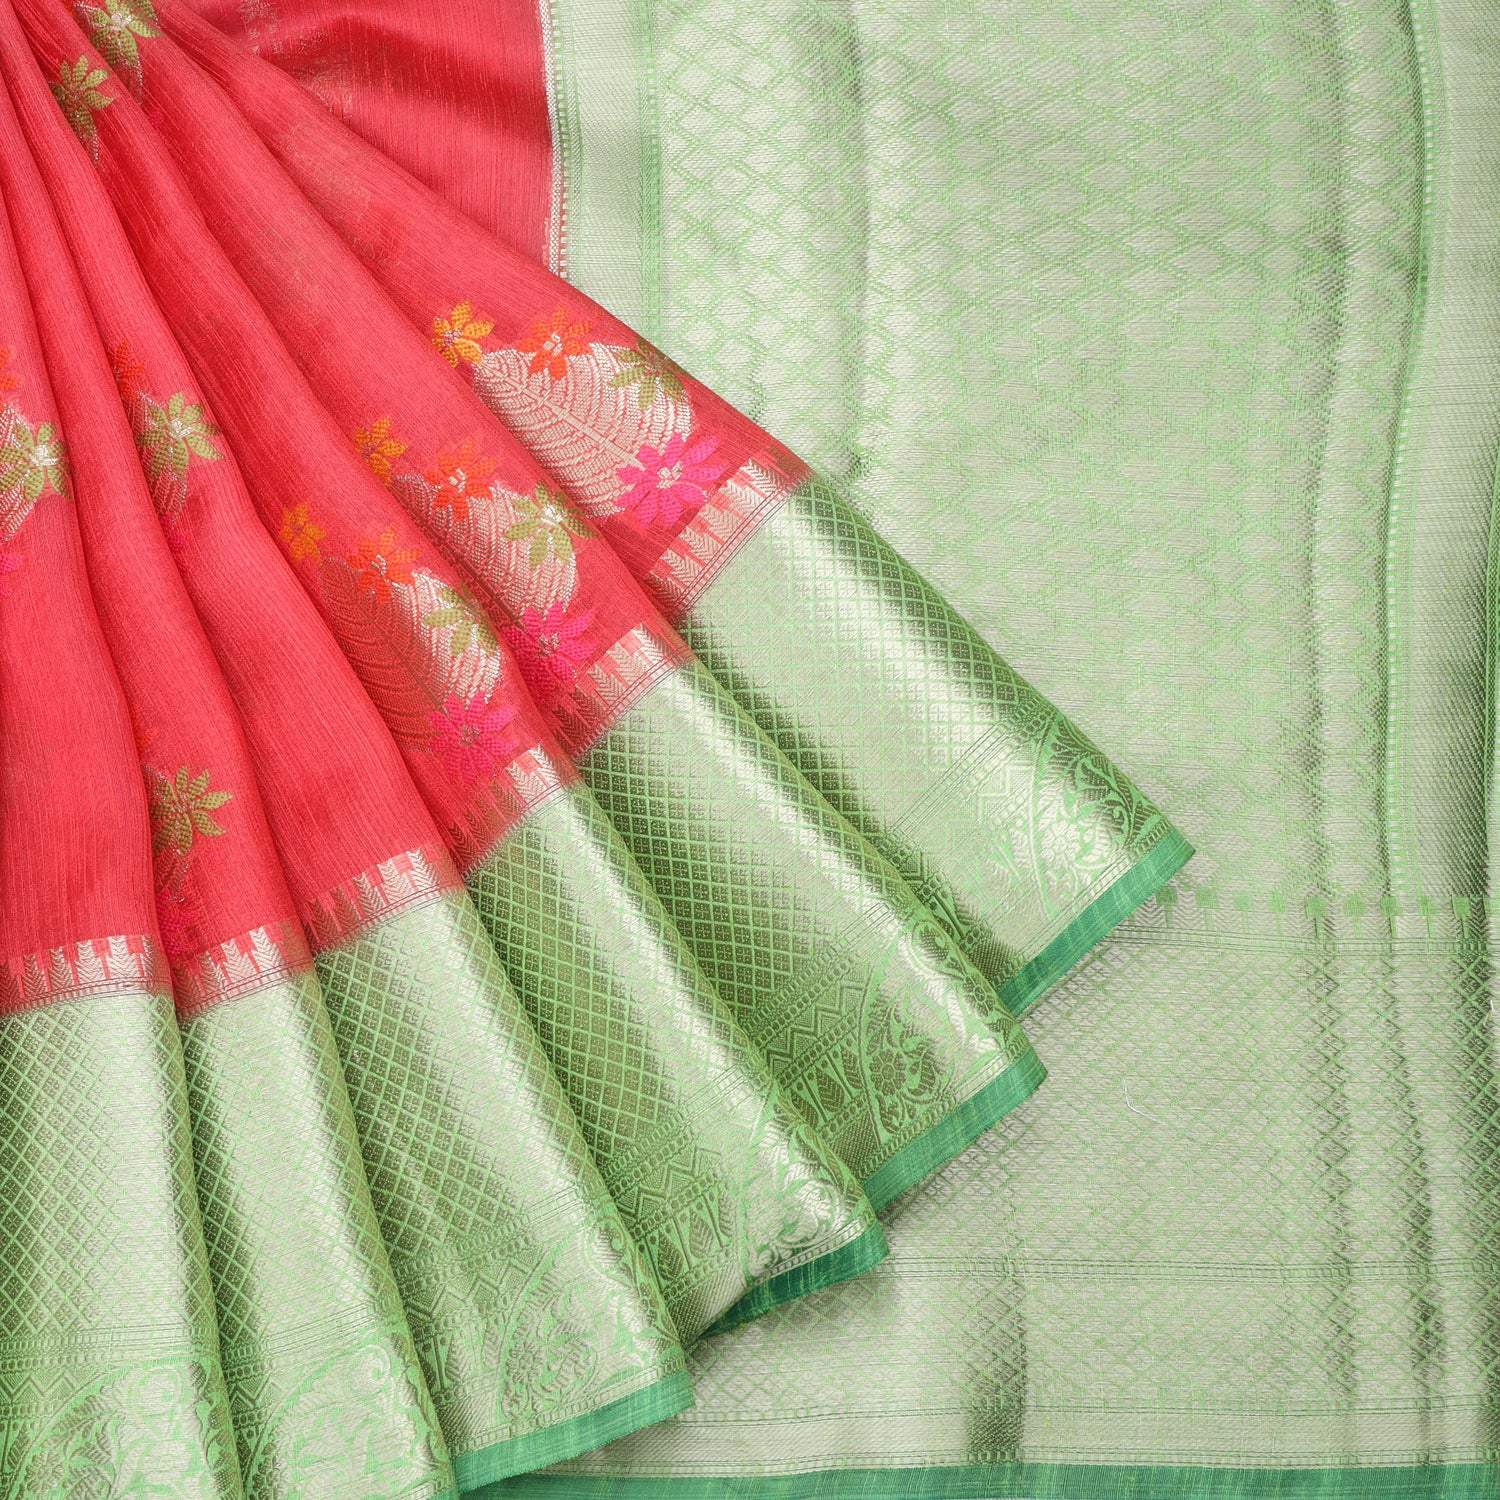 Desire Red Matka Silk Saree With Leaf Motifs - Singhania's